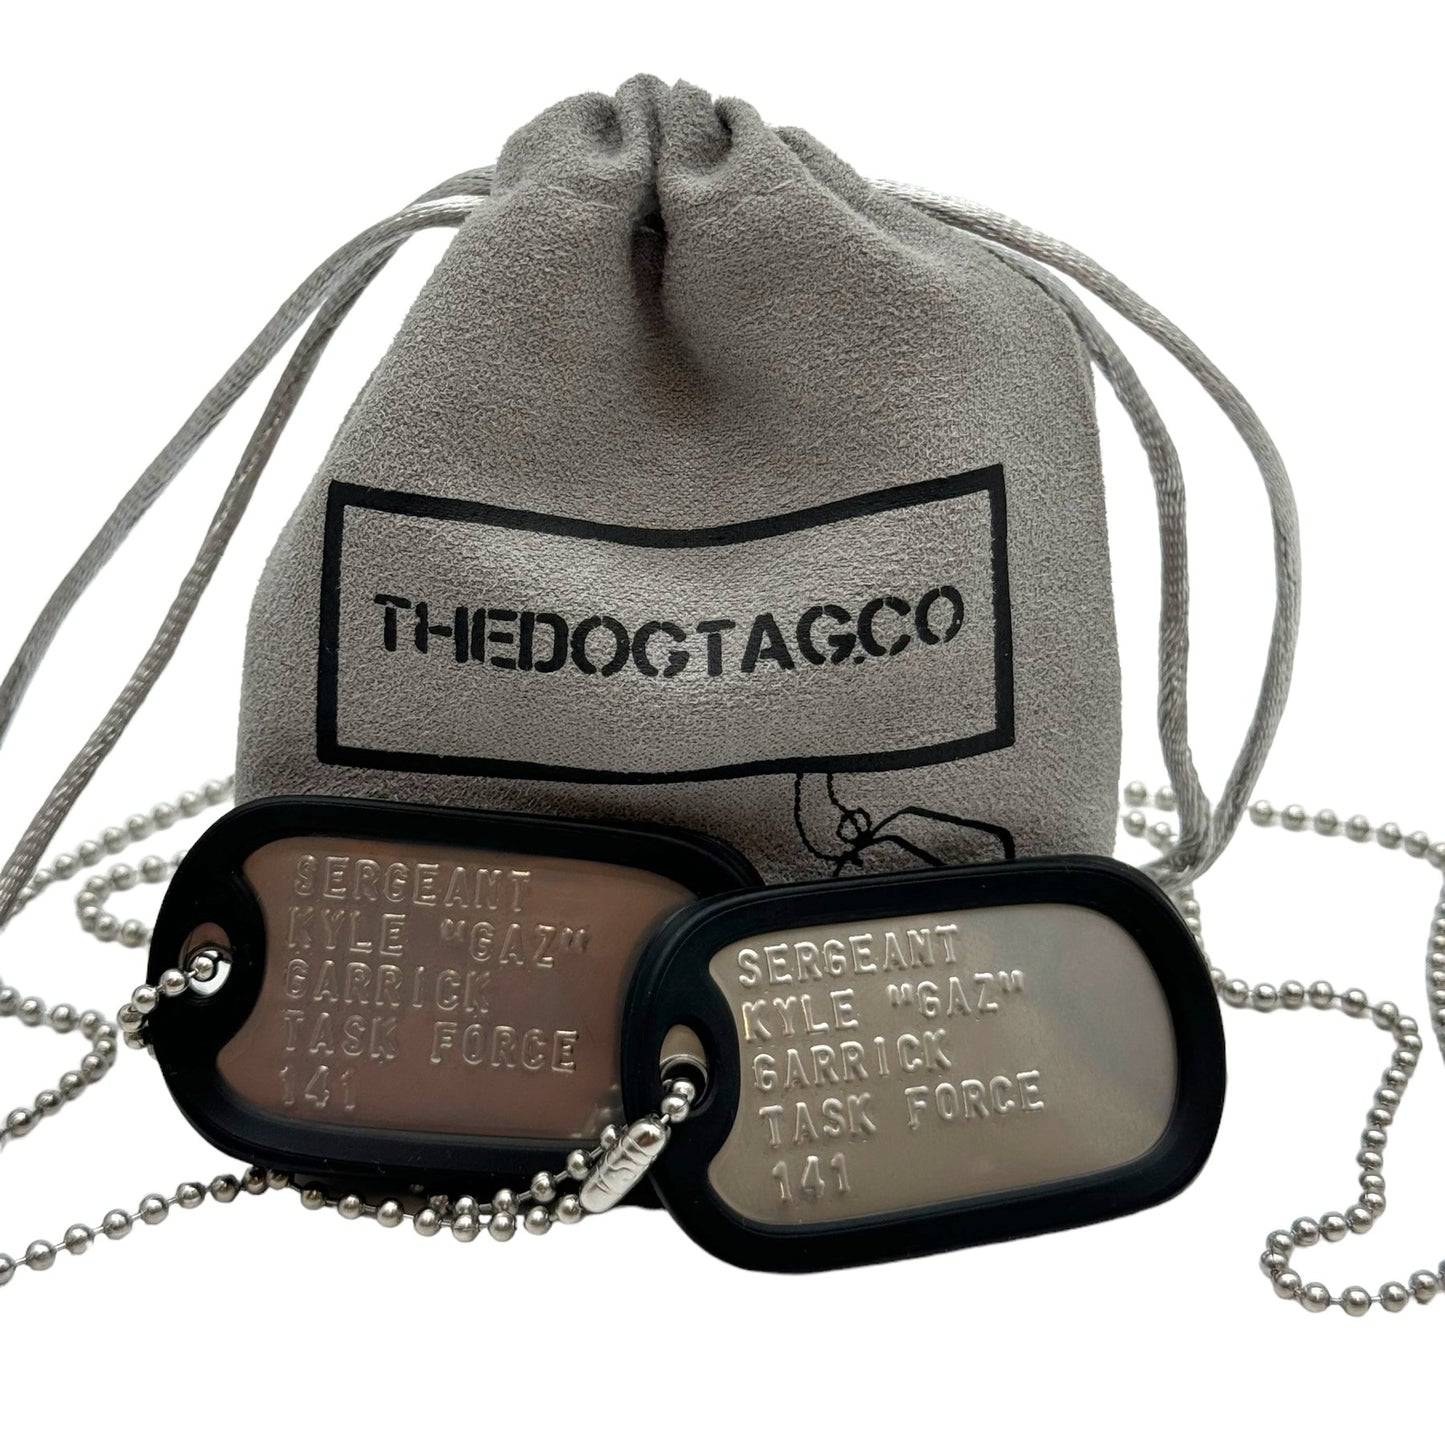 'KYLE GAZ GARRICK' Military Dog Tags - Cosplay Costume Prop Replica - Stainless Steel Chains Included - TheDogTagCo